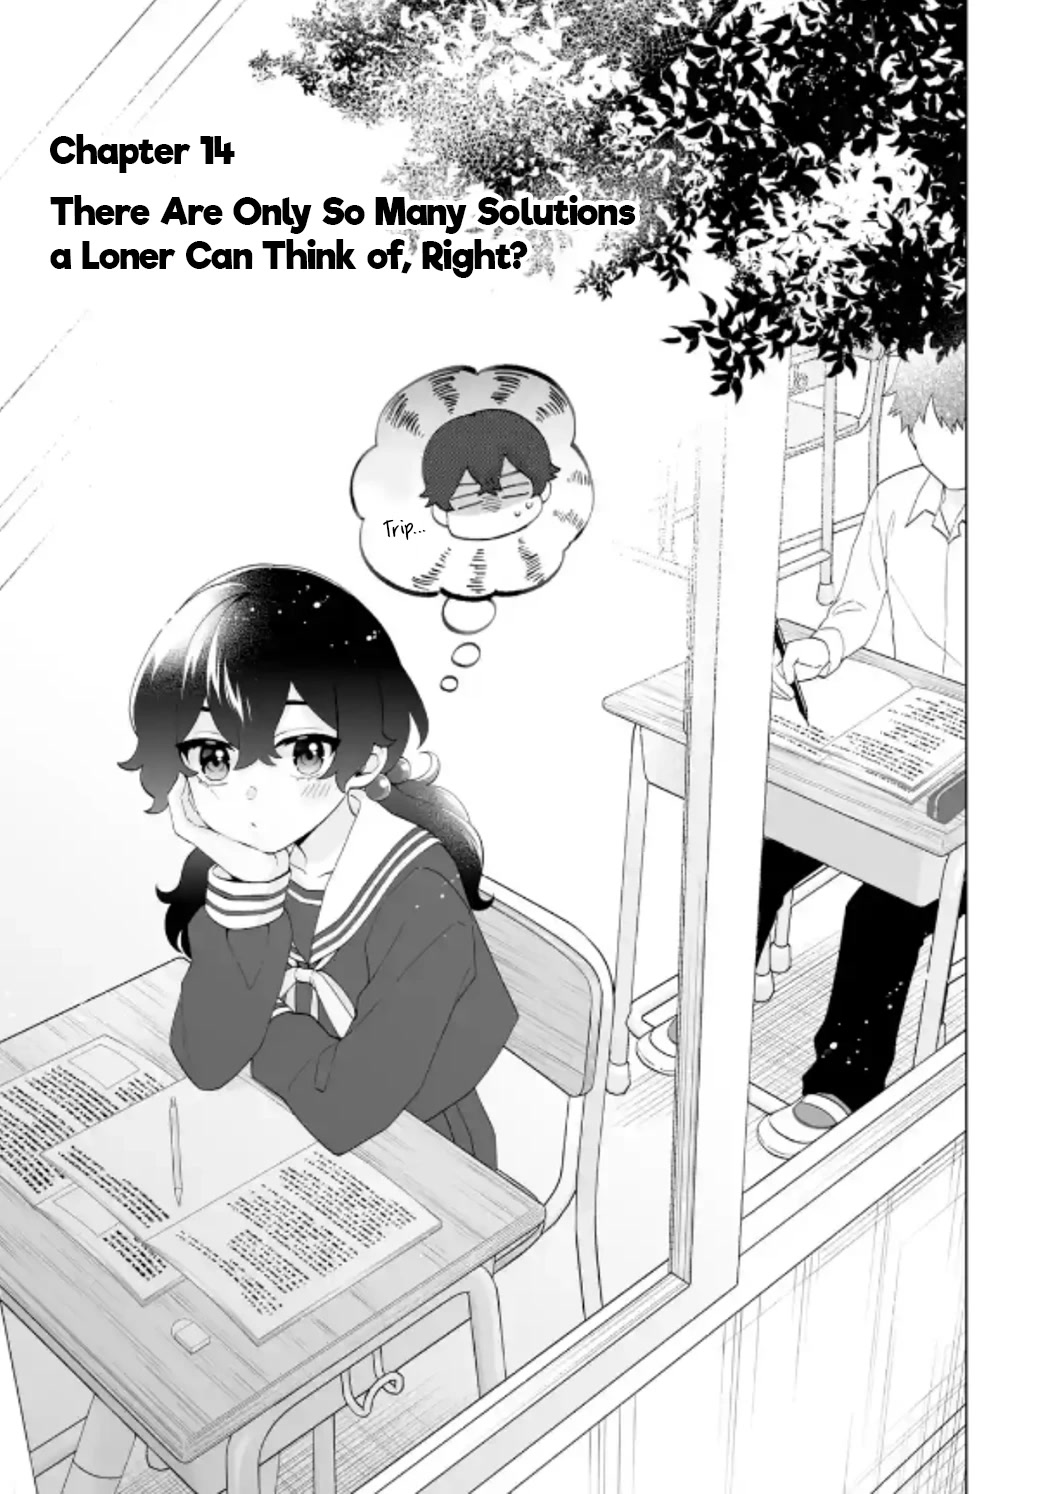 Please Leave Me Alone (For Some Reason, She Wants to Change a Lone Wolf's Helpless High School Life.) - chapter 14 - #1